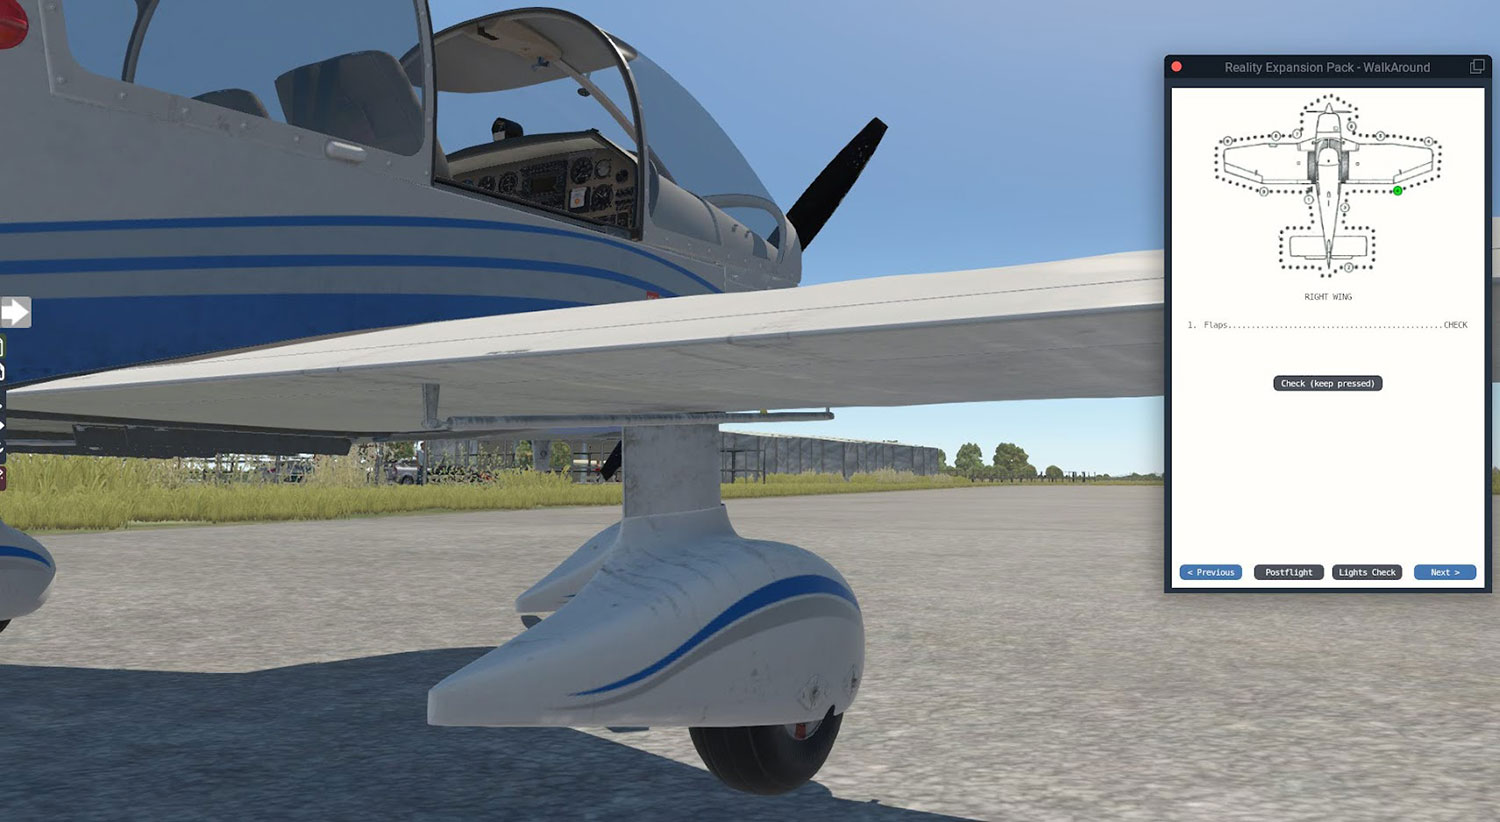 Reality Expansion Pack for Just Flight Robin DR400 XP